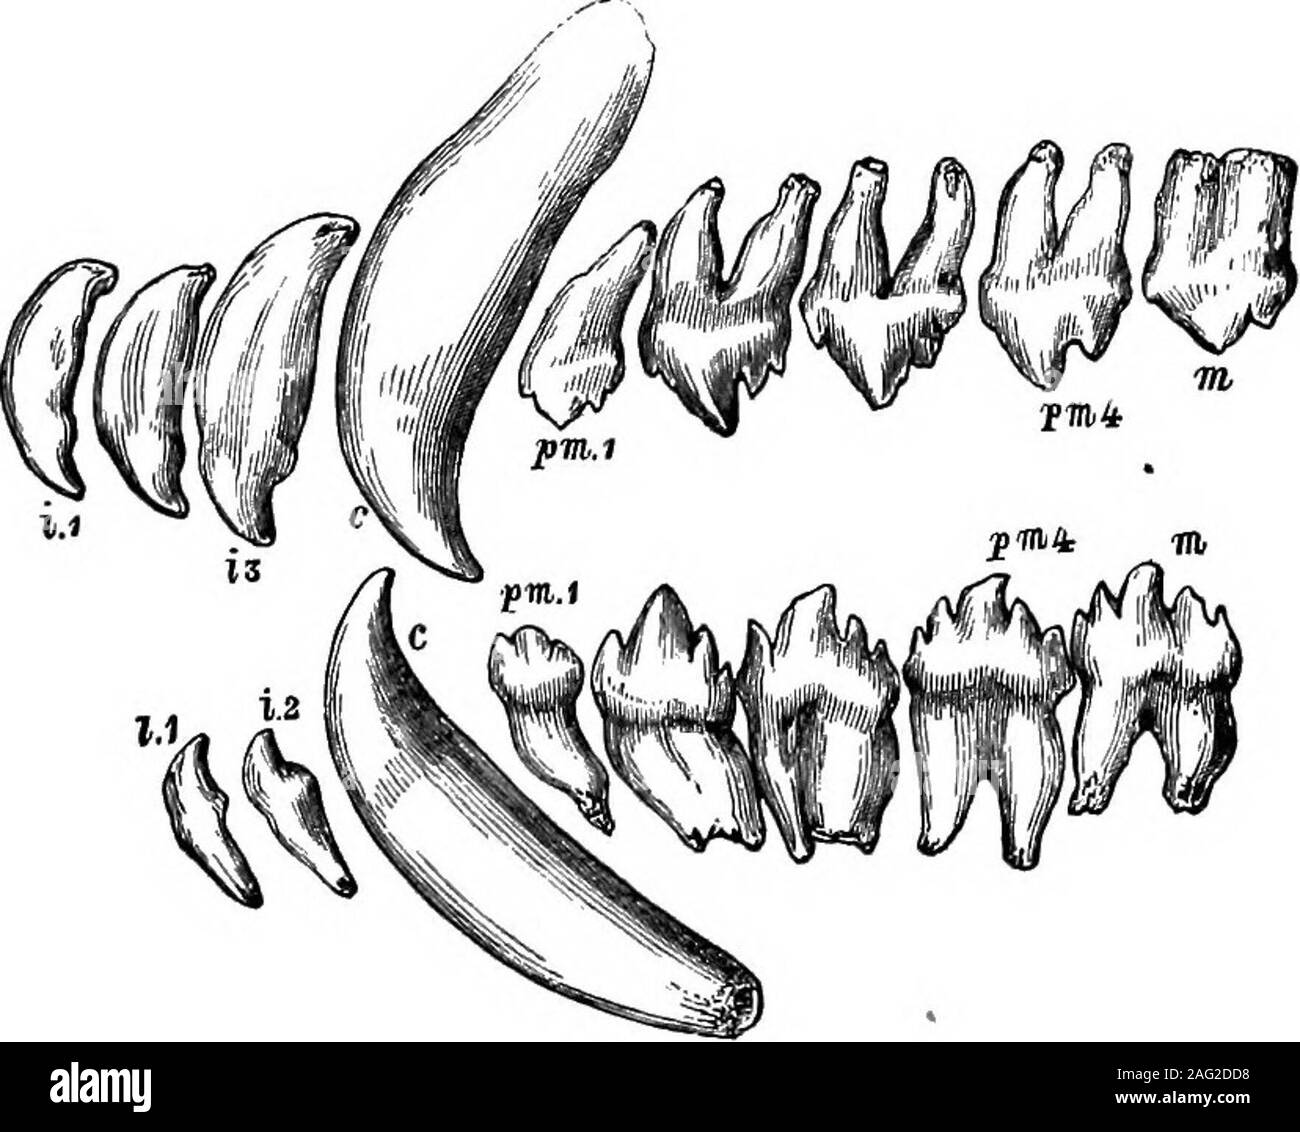 . Natural history object lessons : a manual for teachers. nt, but the jaw can be worked fromside to side, and the bear can actually grind his food. Inthe aquatic carnivora—the seal-tribe—the dentition againchanges to suit the habits of the animals. The teeth arespecially formed for seizing and holding the slippery preyon which they feed ; and for dividing the body of the fishthey devour into large pieces. The peculiar scissor-likecutting molars of the land carnivora are replaced by teeth ANIMALS AND THEIE USES. 155 either serrate, or saw-like in character, or somewhat flattenedcrowns with coni Stock Photo